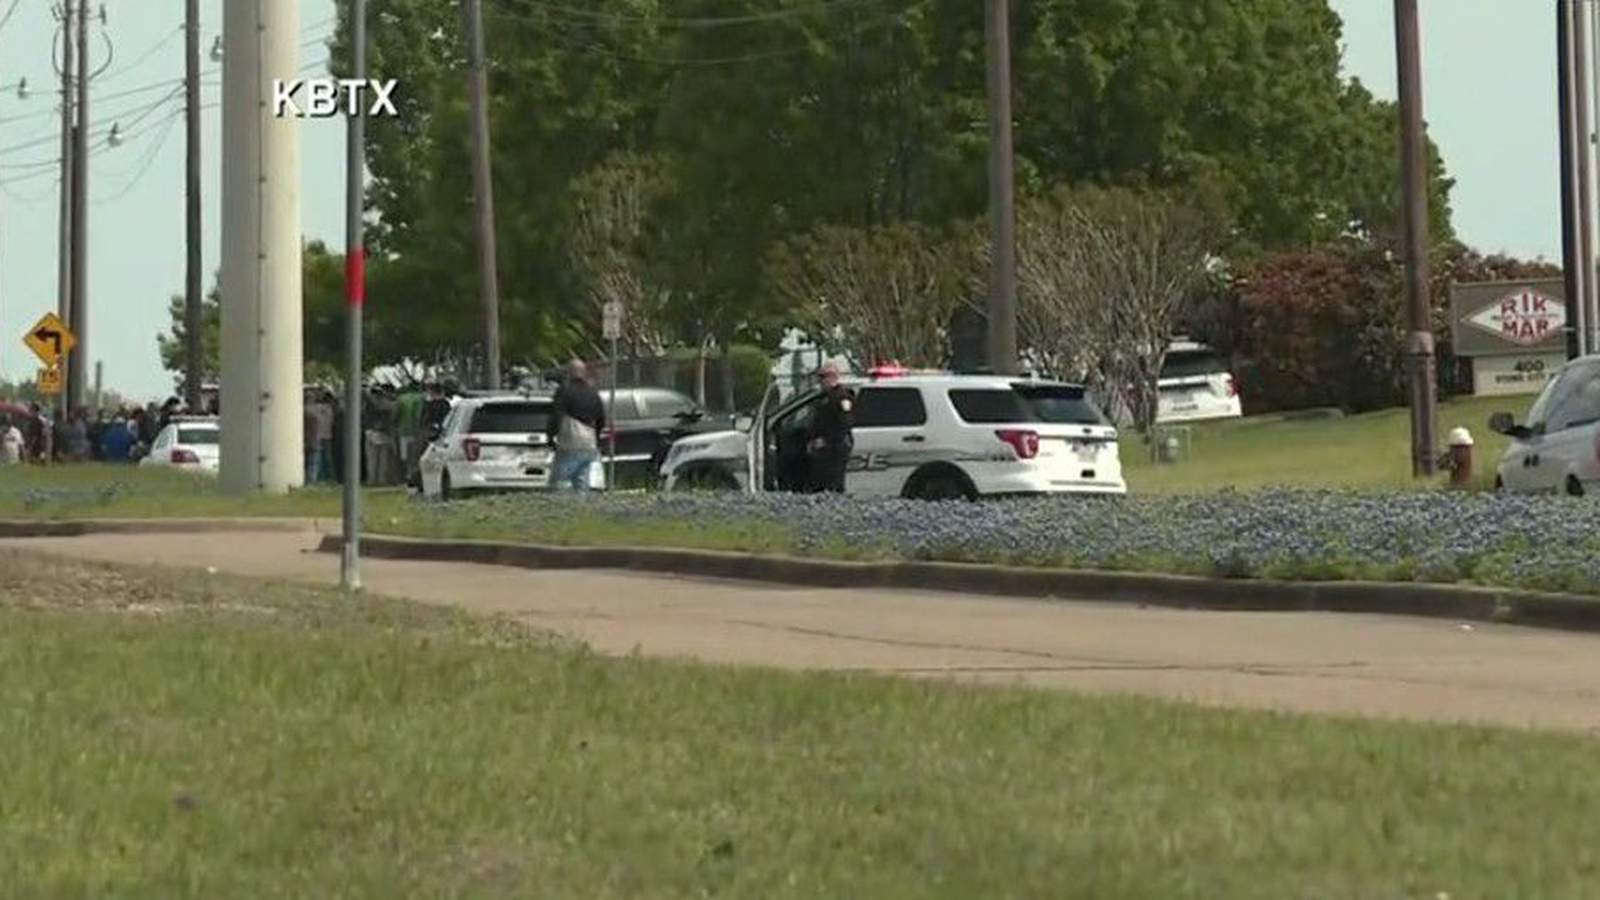 Suspect in custody after 7 shot, 1 killed in shooting at Bryan warehouse, police say